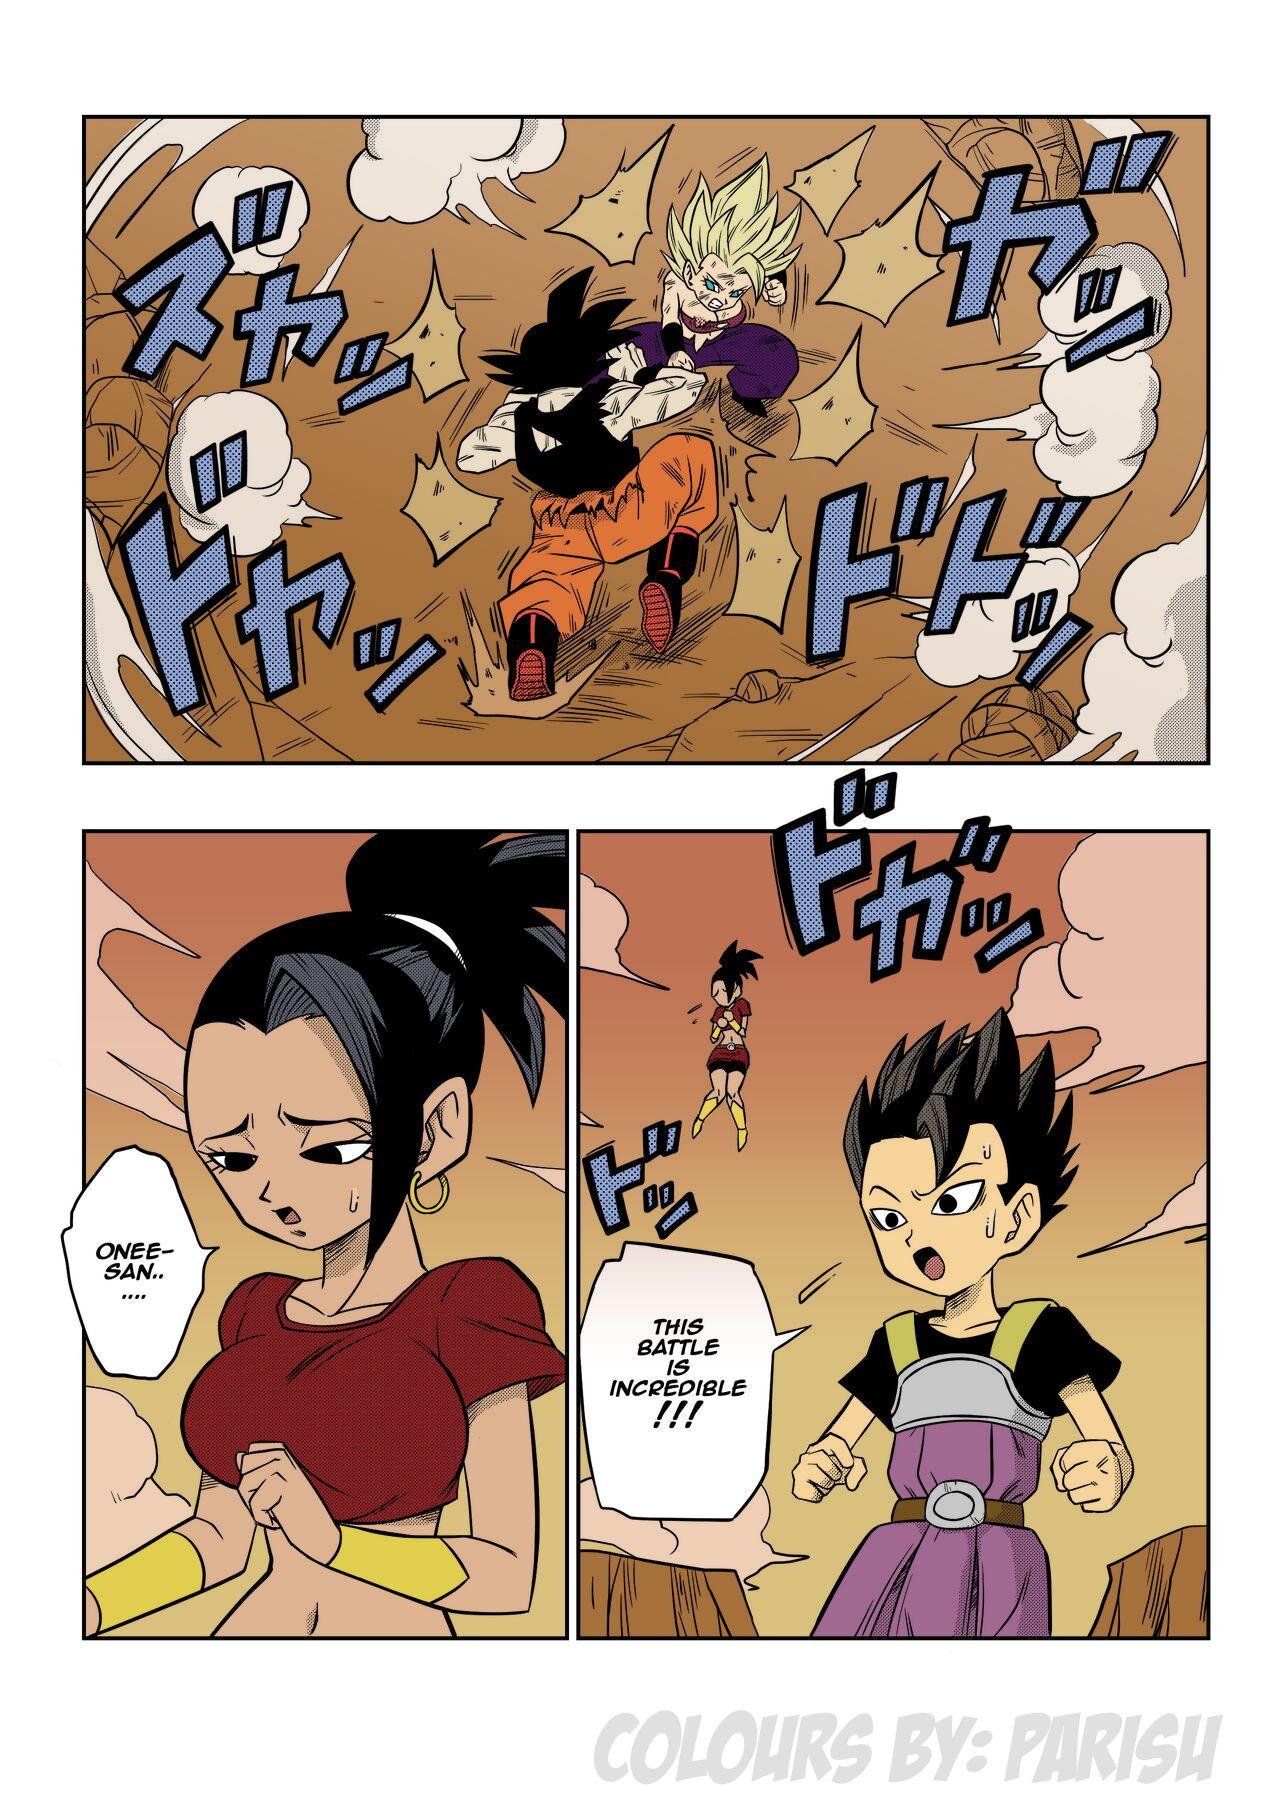 Busty Fight in the 6th Universe!!! - Dragon ball Dragon ball super Stepsister - Page 4